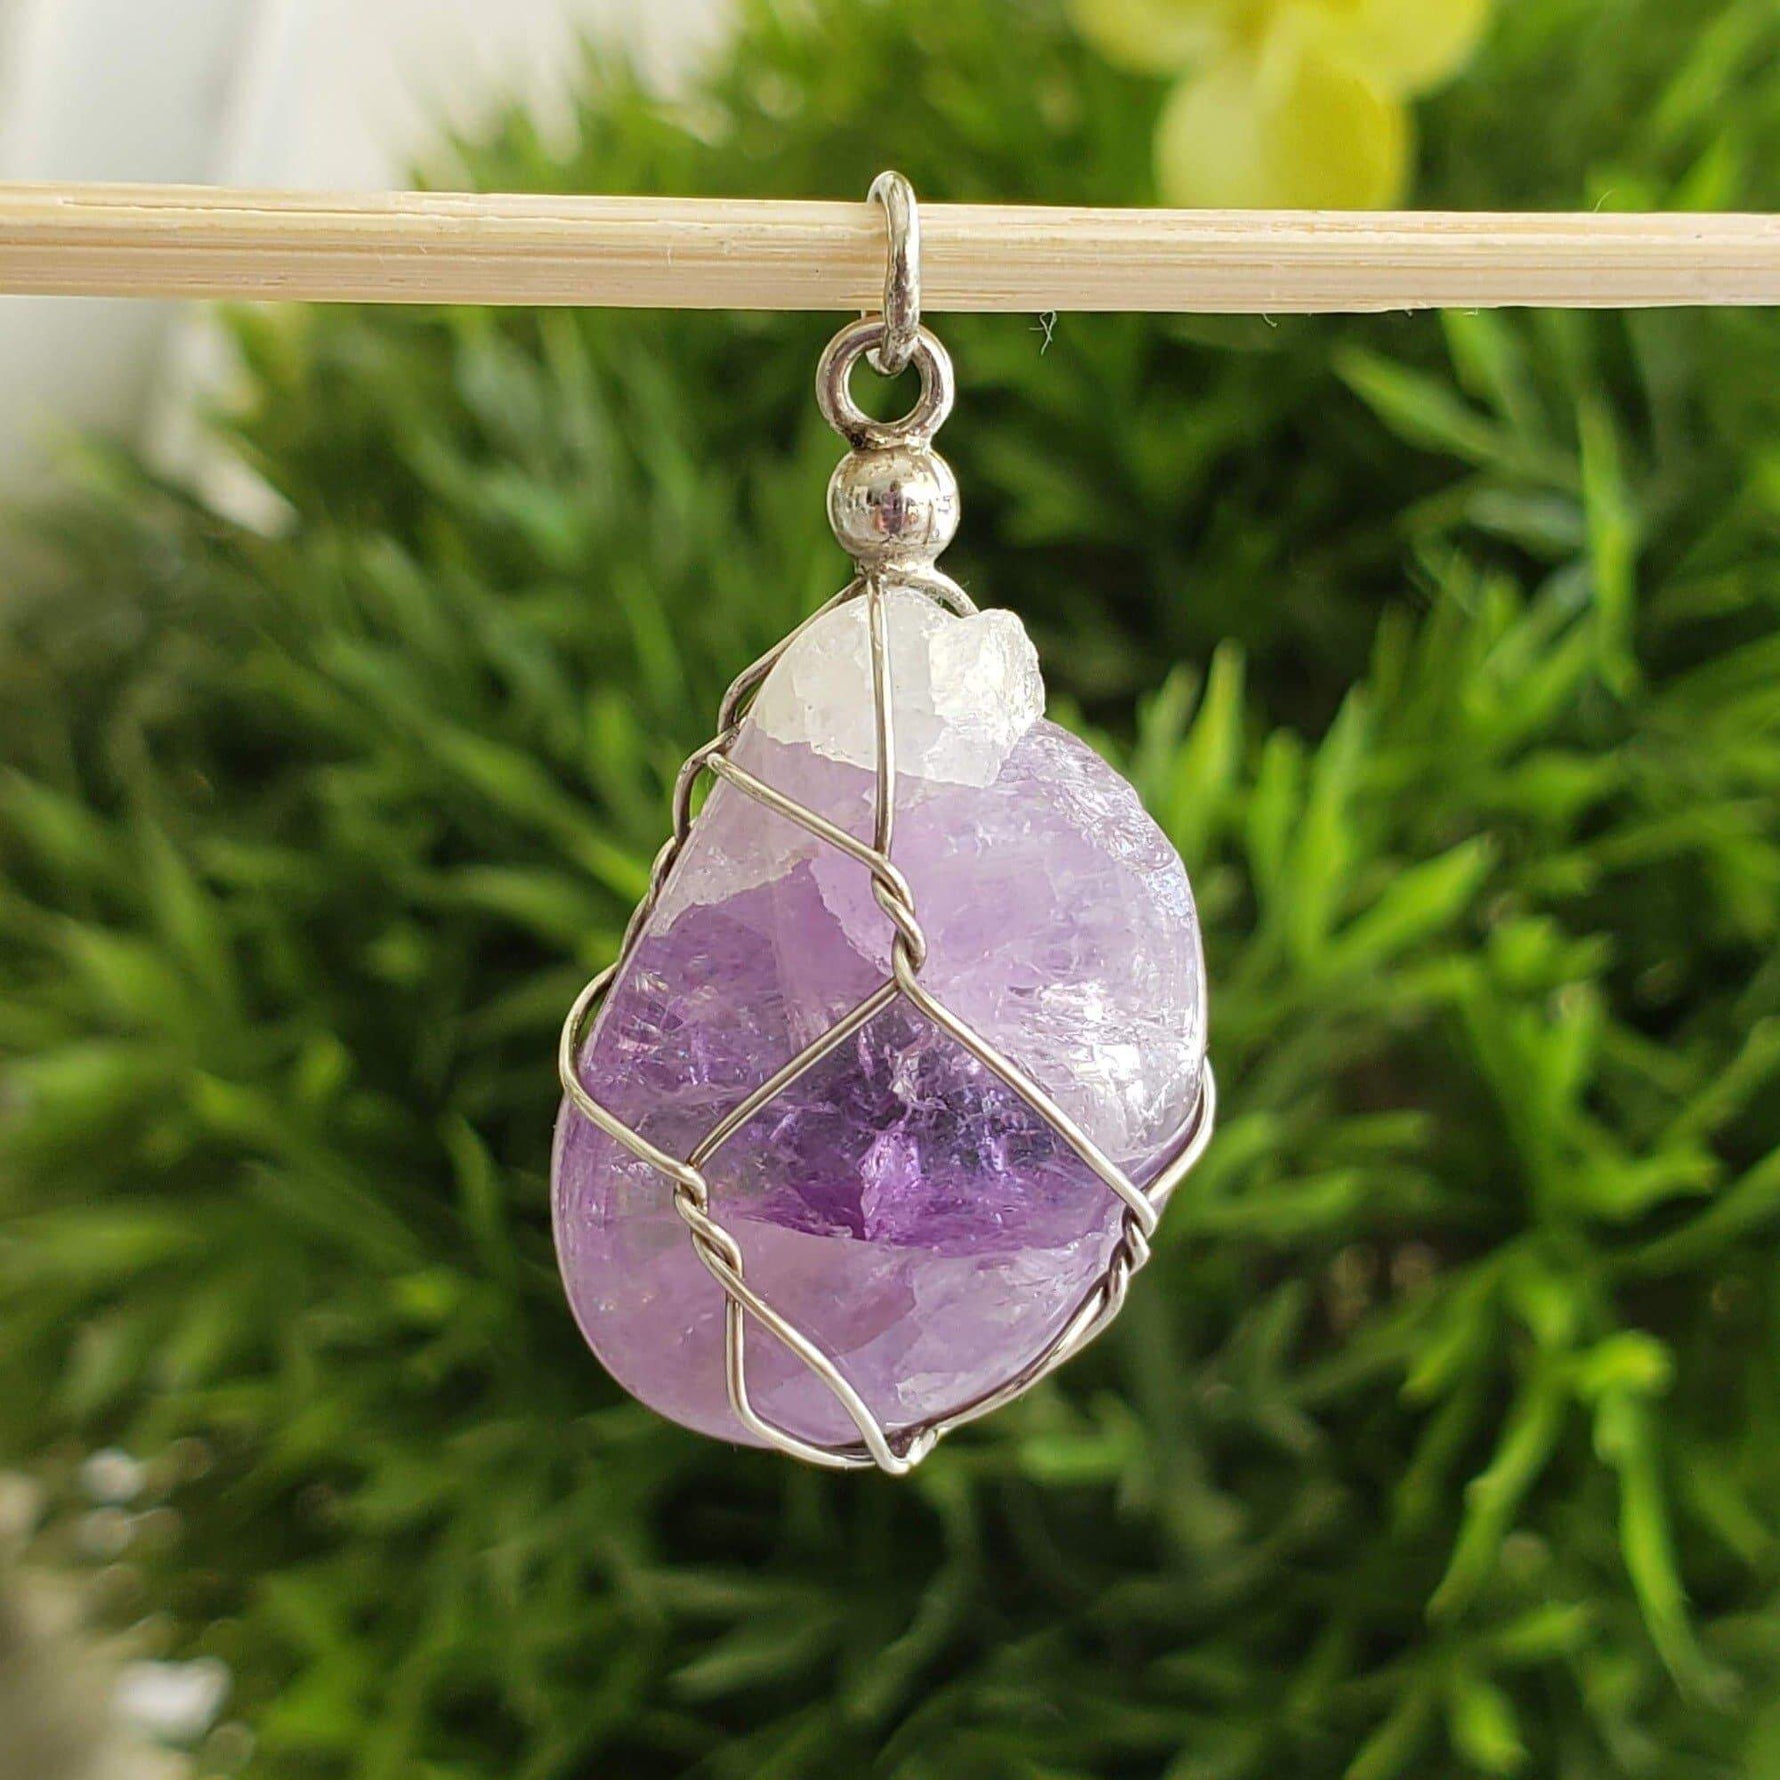 Amethyst Pendant | 925 Silver Wire Wrapped Pendant | Natural Tumbled Amethyst